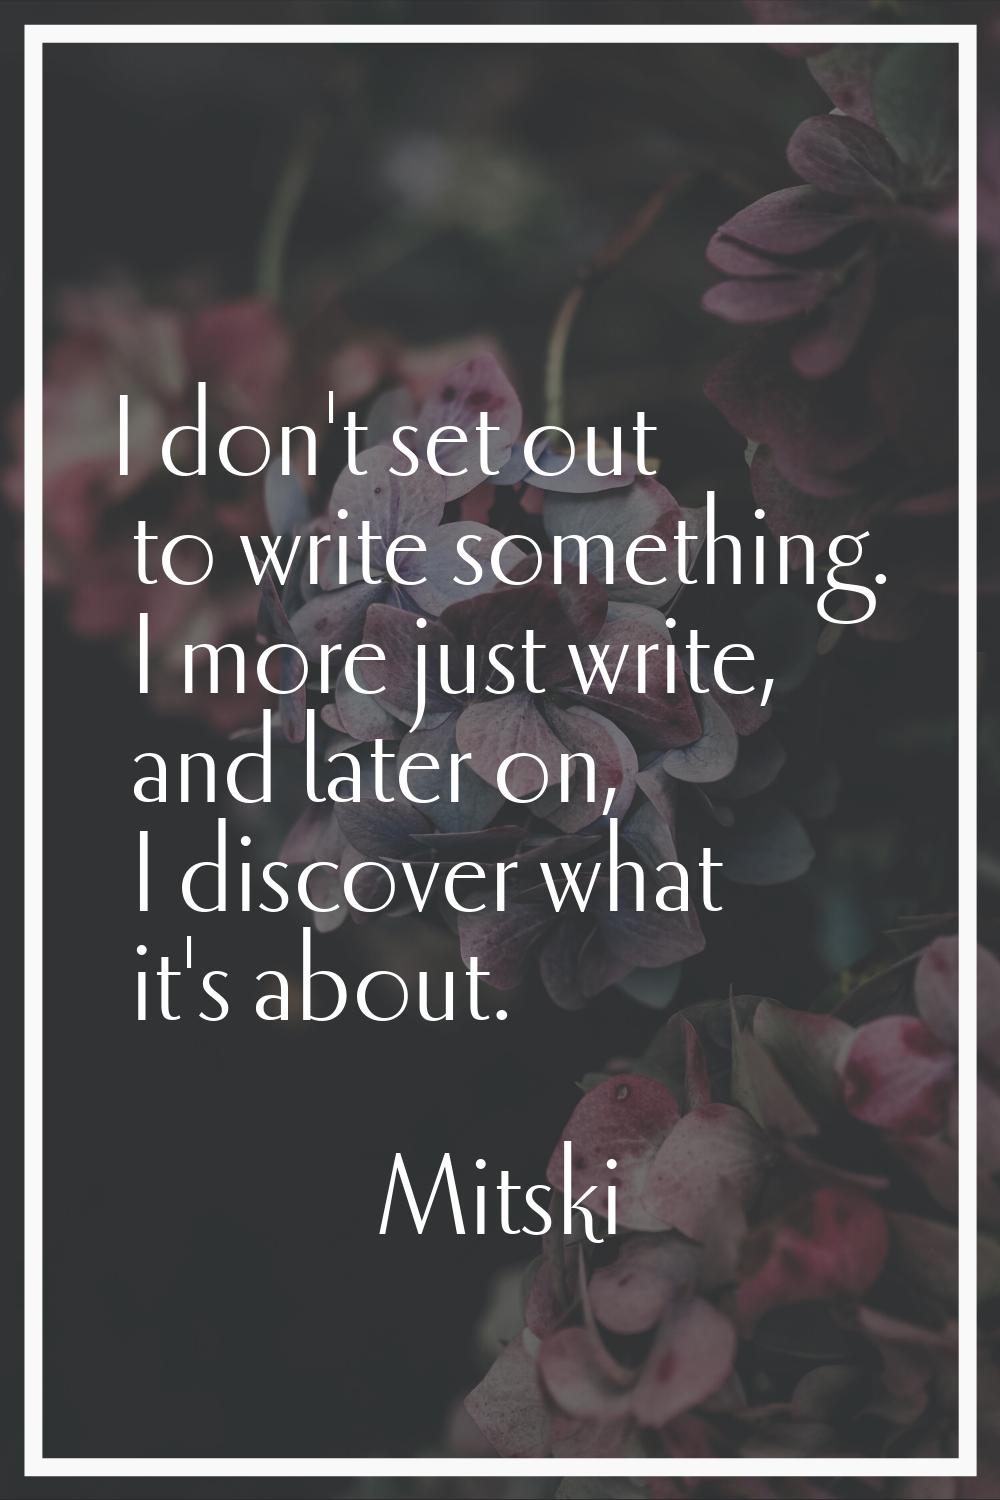 I don't set out to write something. I more just write, and later on, I discover what it's about.